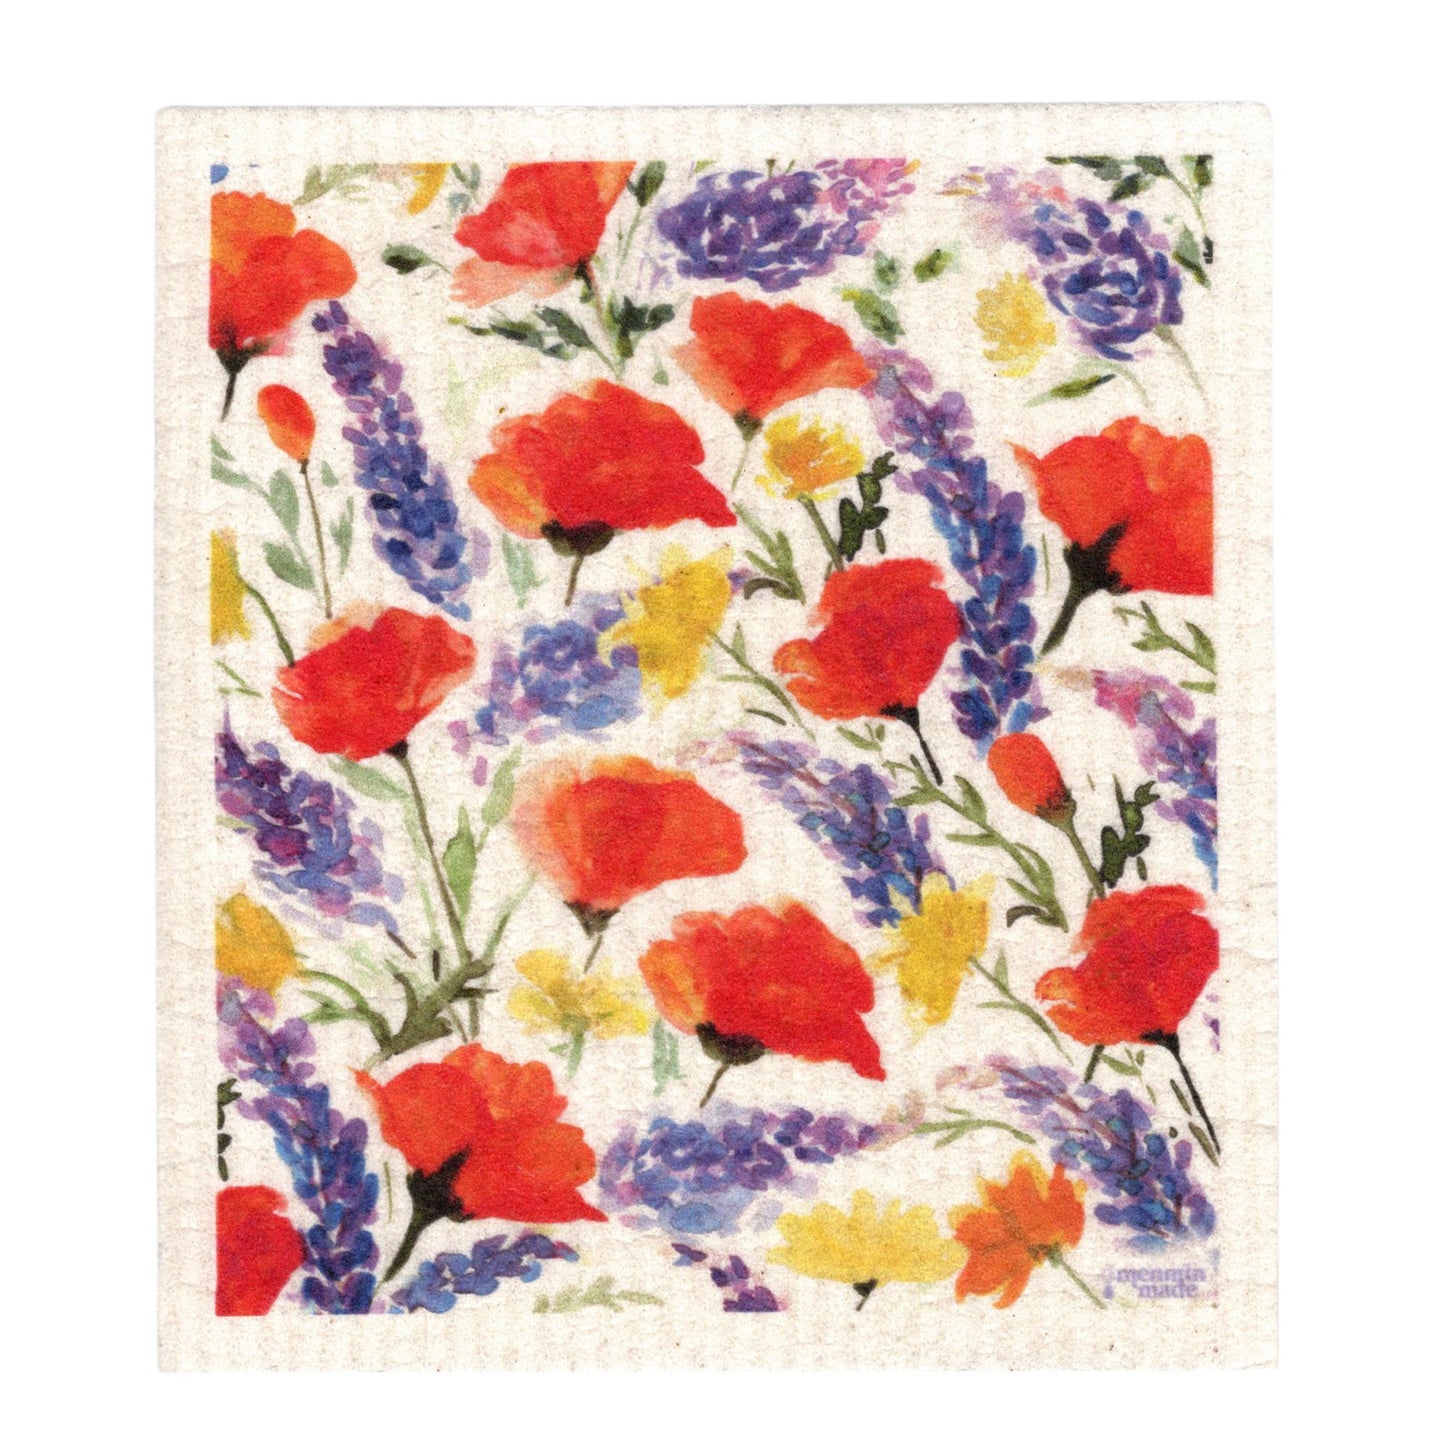 A white, textured, Swedish dishcloth featuring watercolor California poppies, California buttercups, and wild lupine.